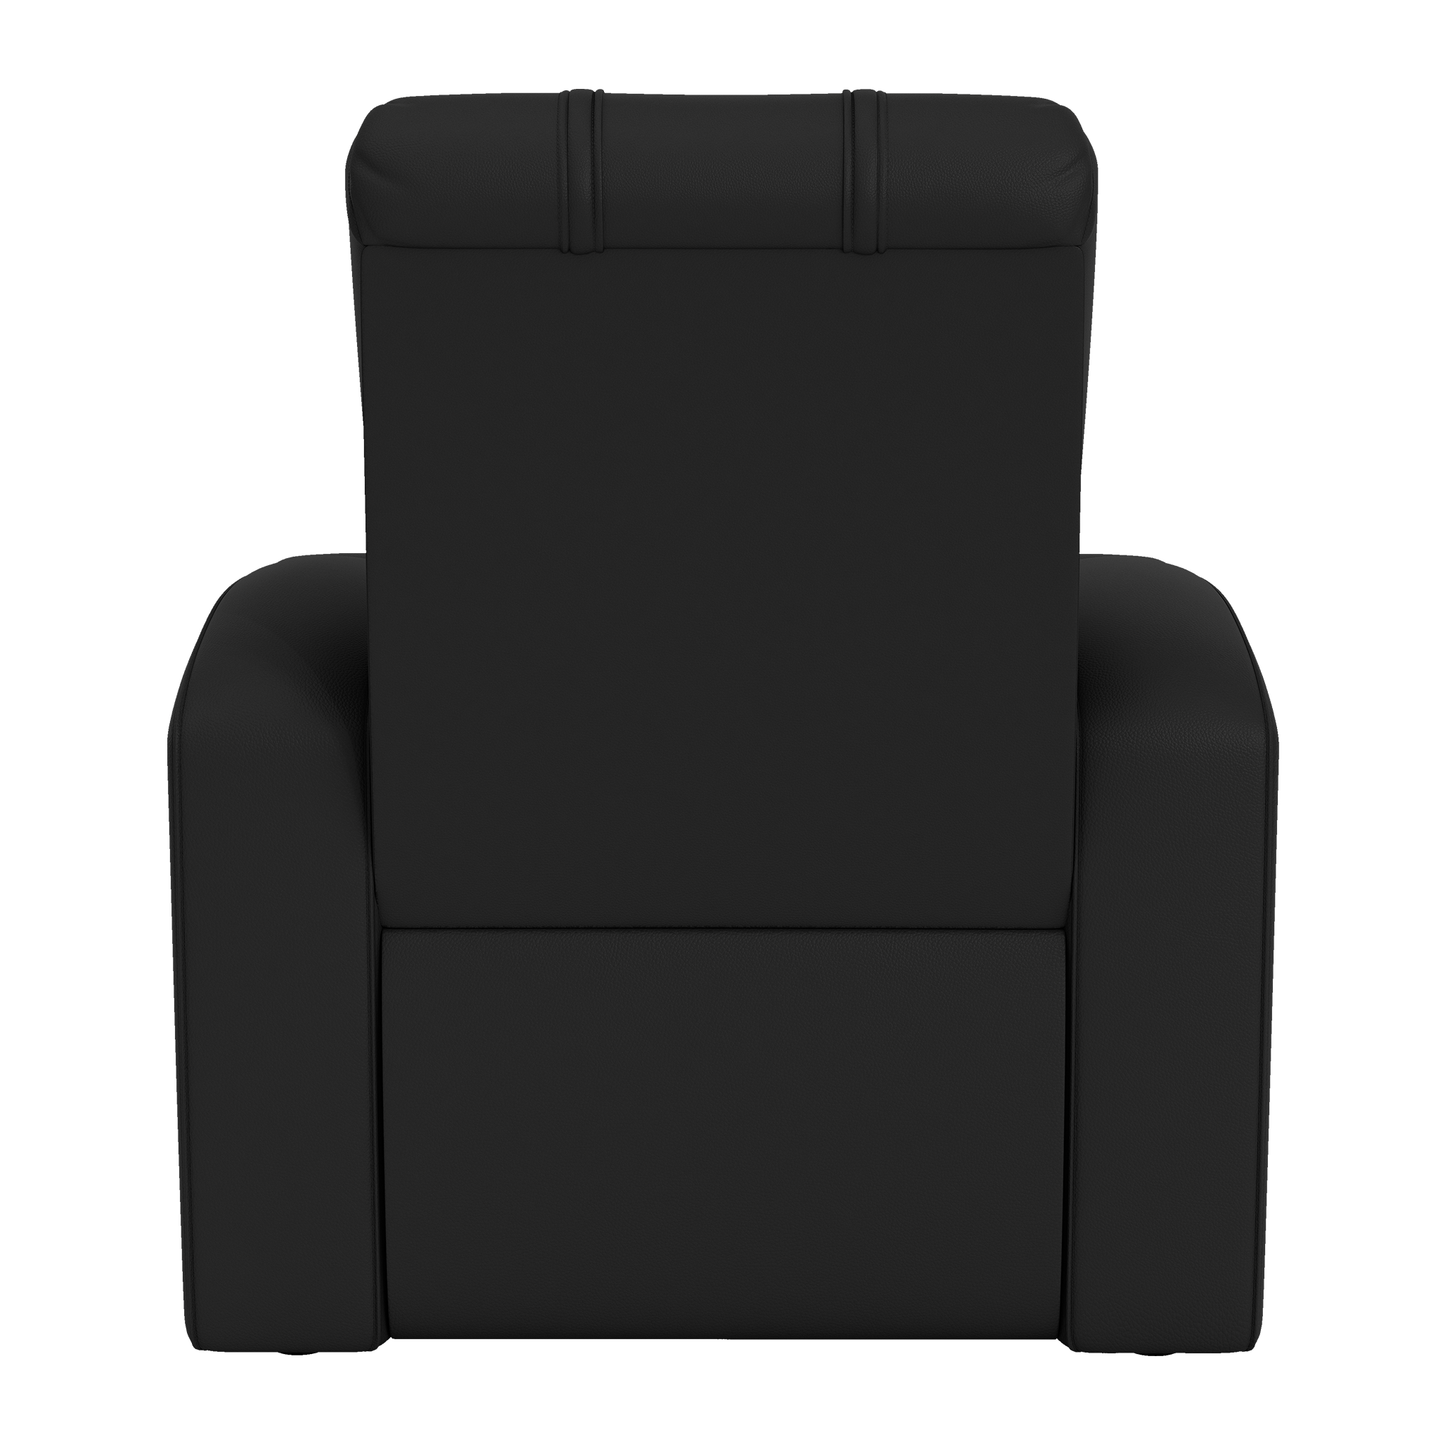 Relax Home Theater Recliner with Vegas Golden Knights 2023 Champions Logo